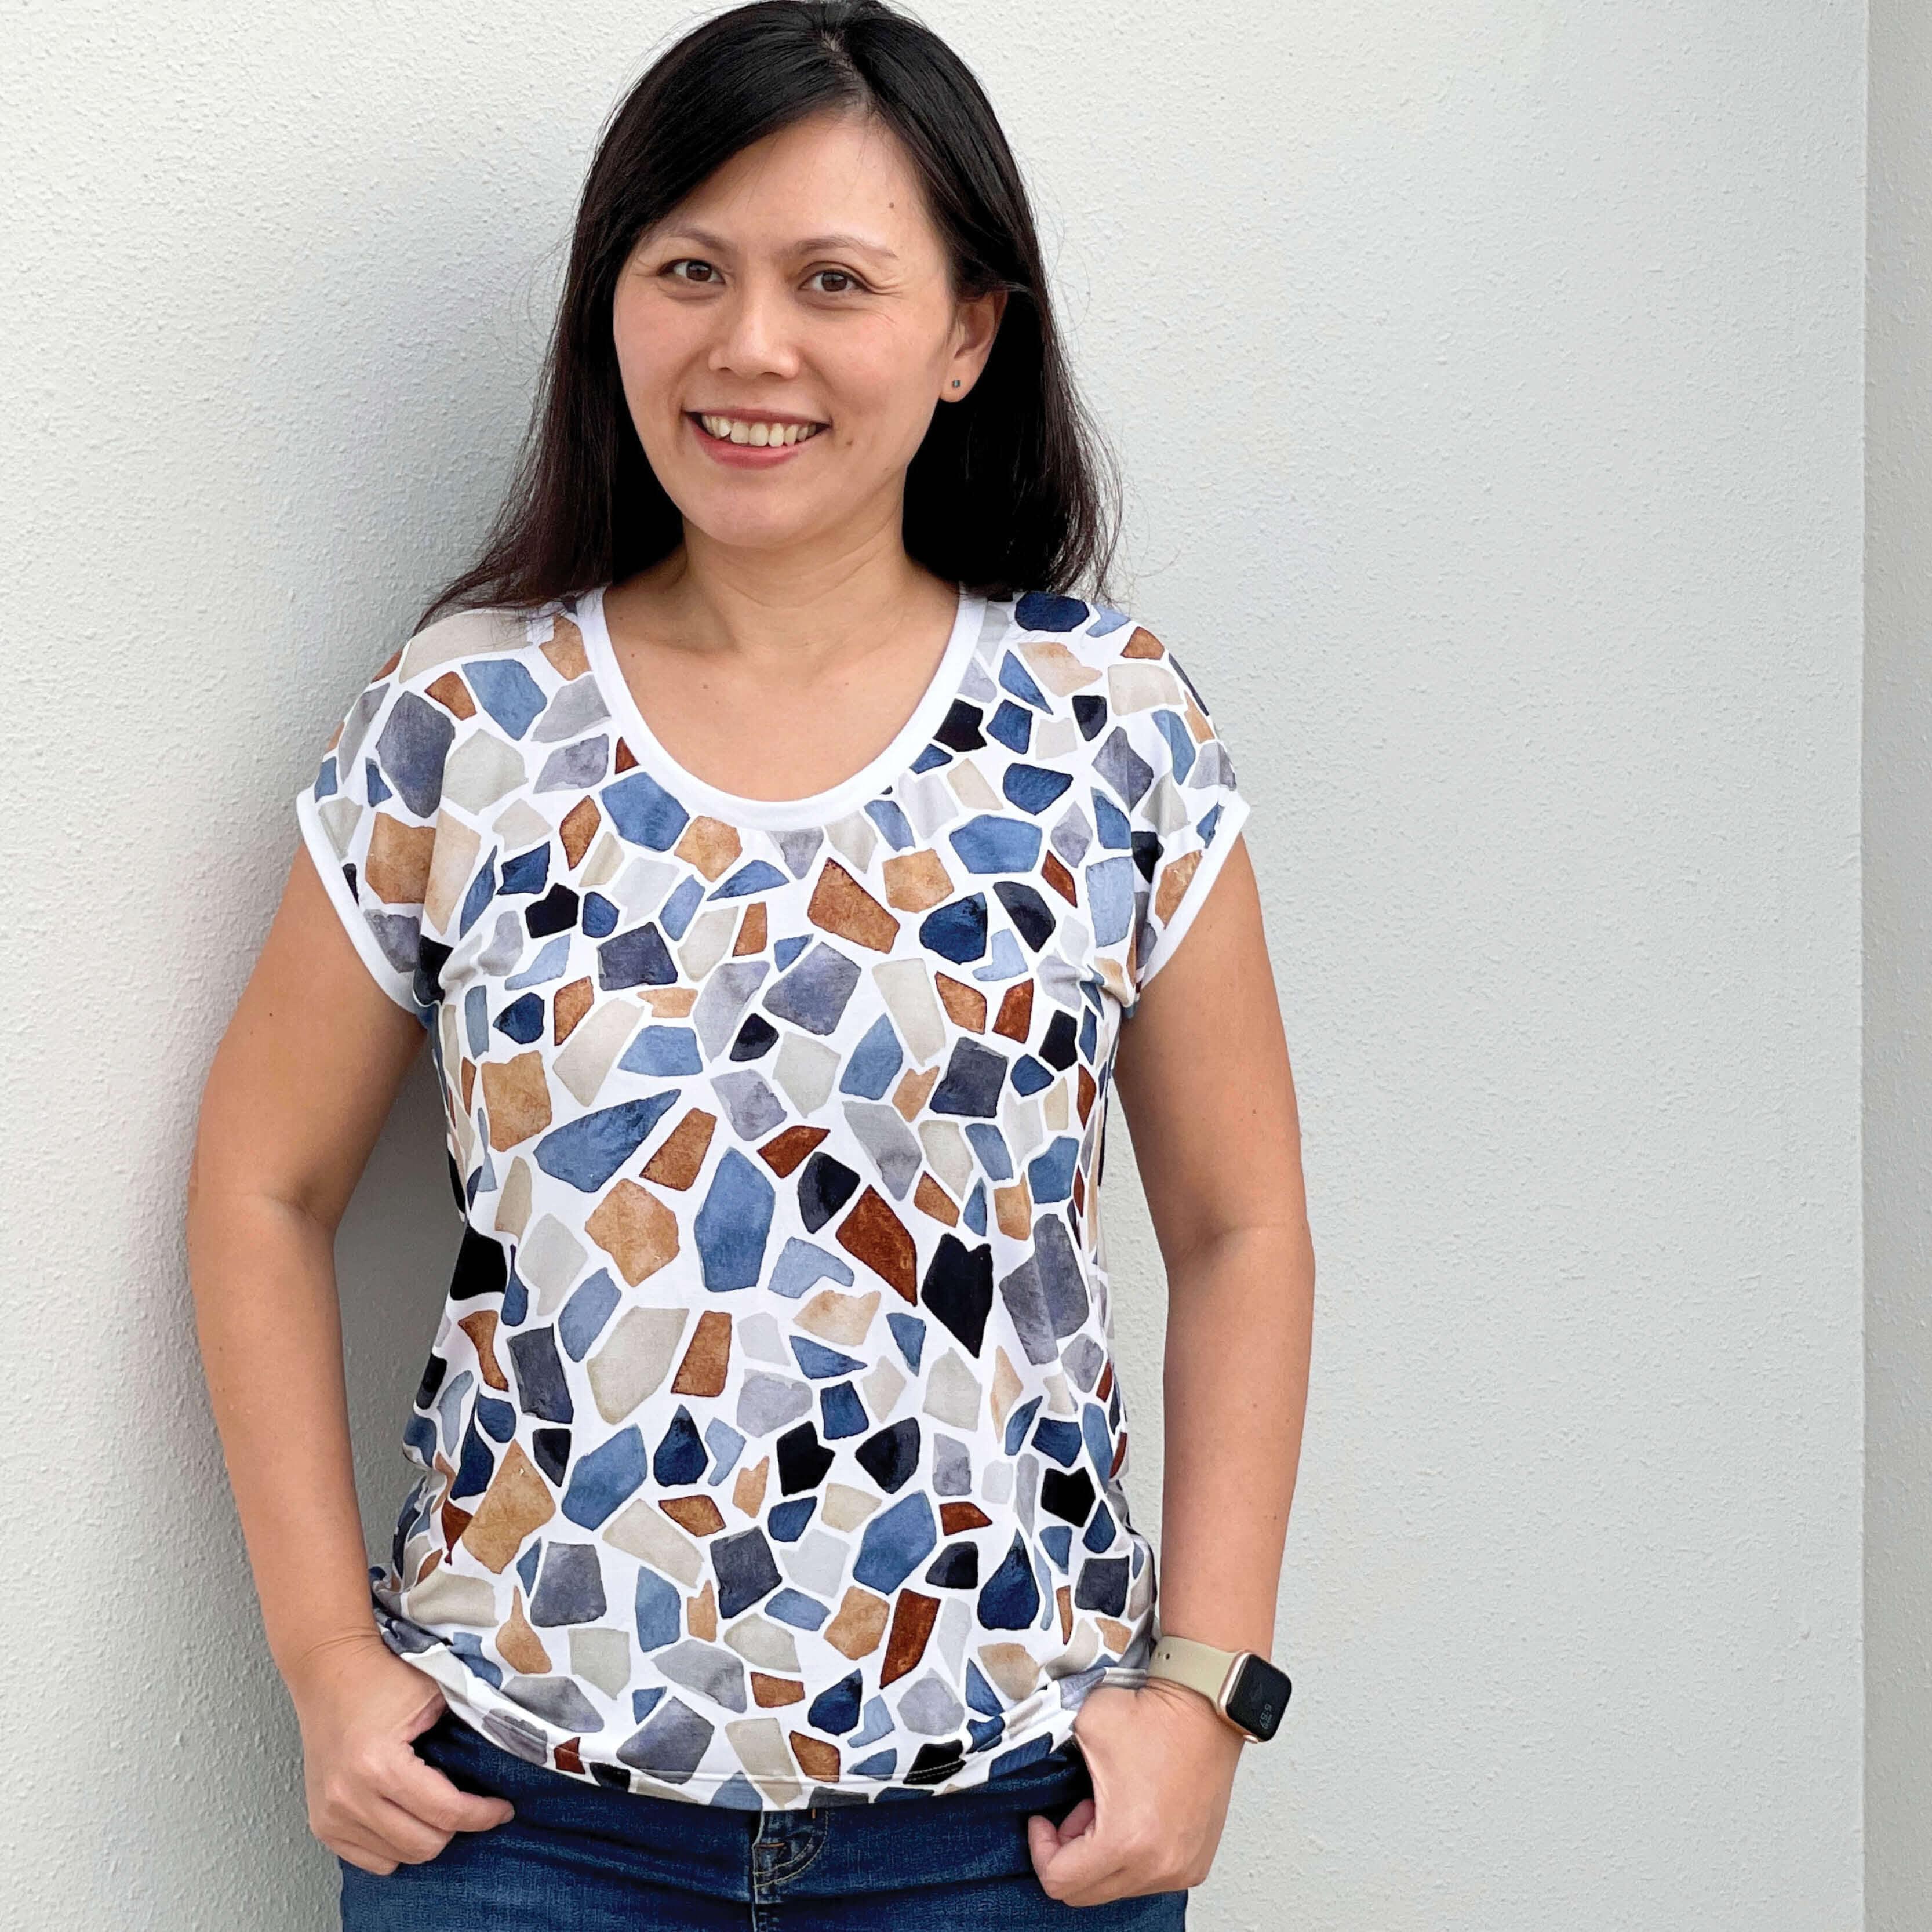 Easy T-shirt sewing pattern | Wardrobe By Me - We love sewing!